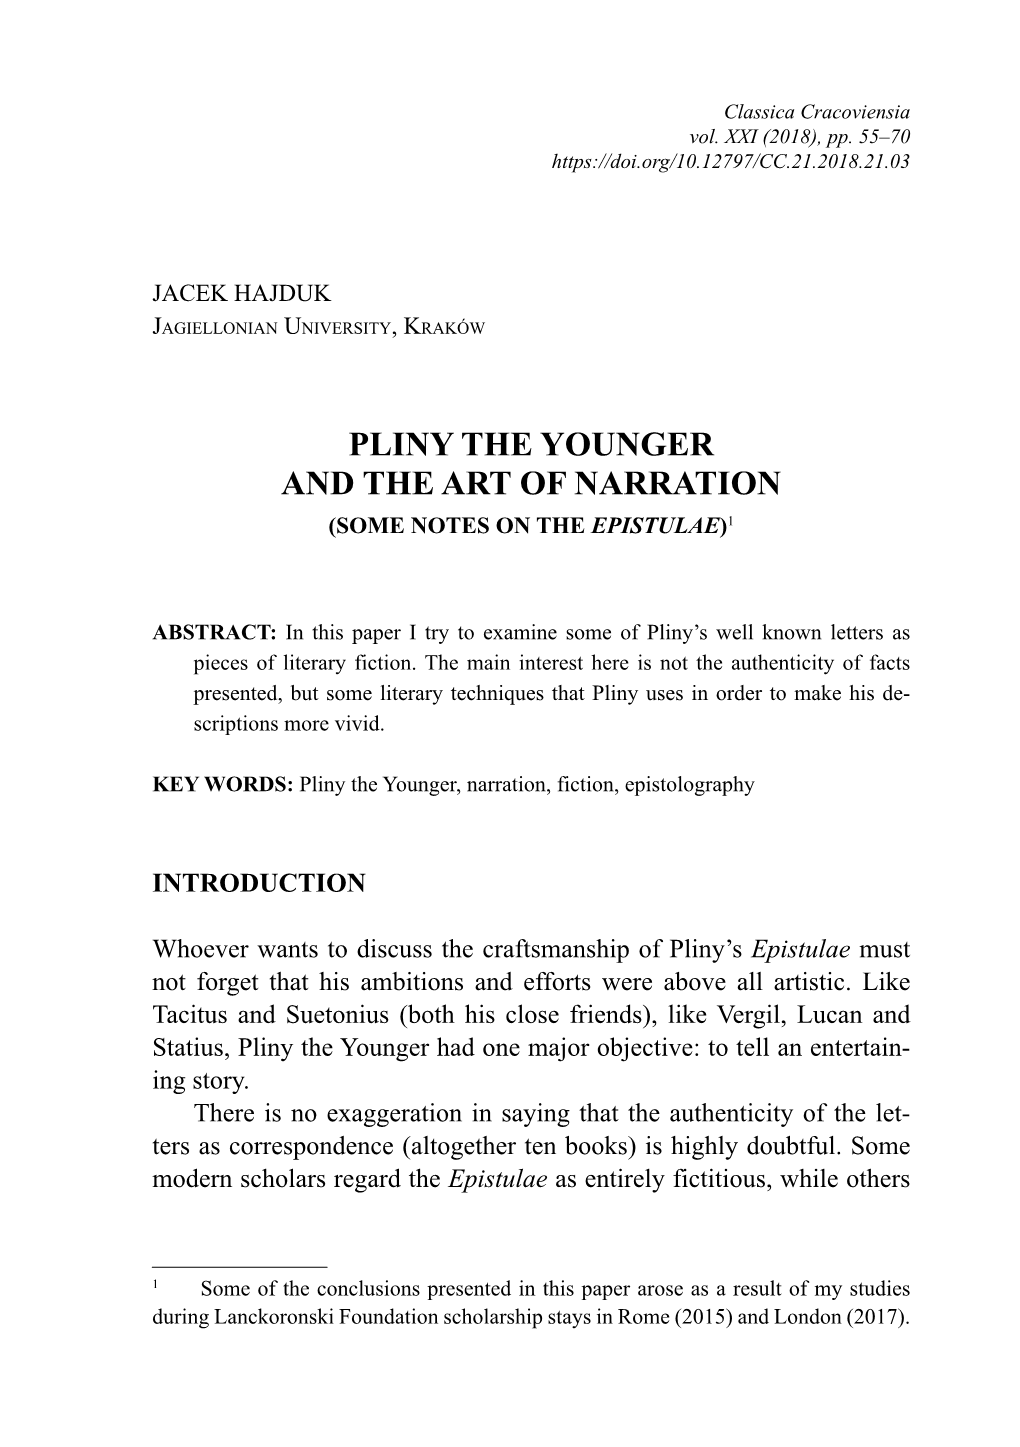 Pliny the Younger and the Art of Narration (Some Notes on the Epistulae)1